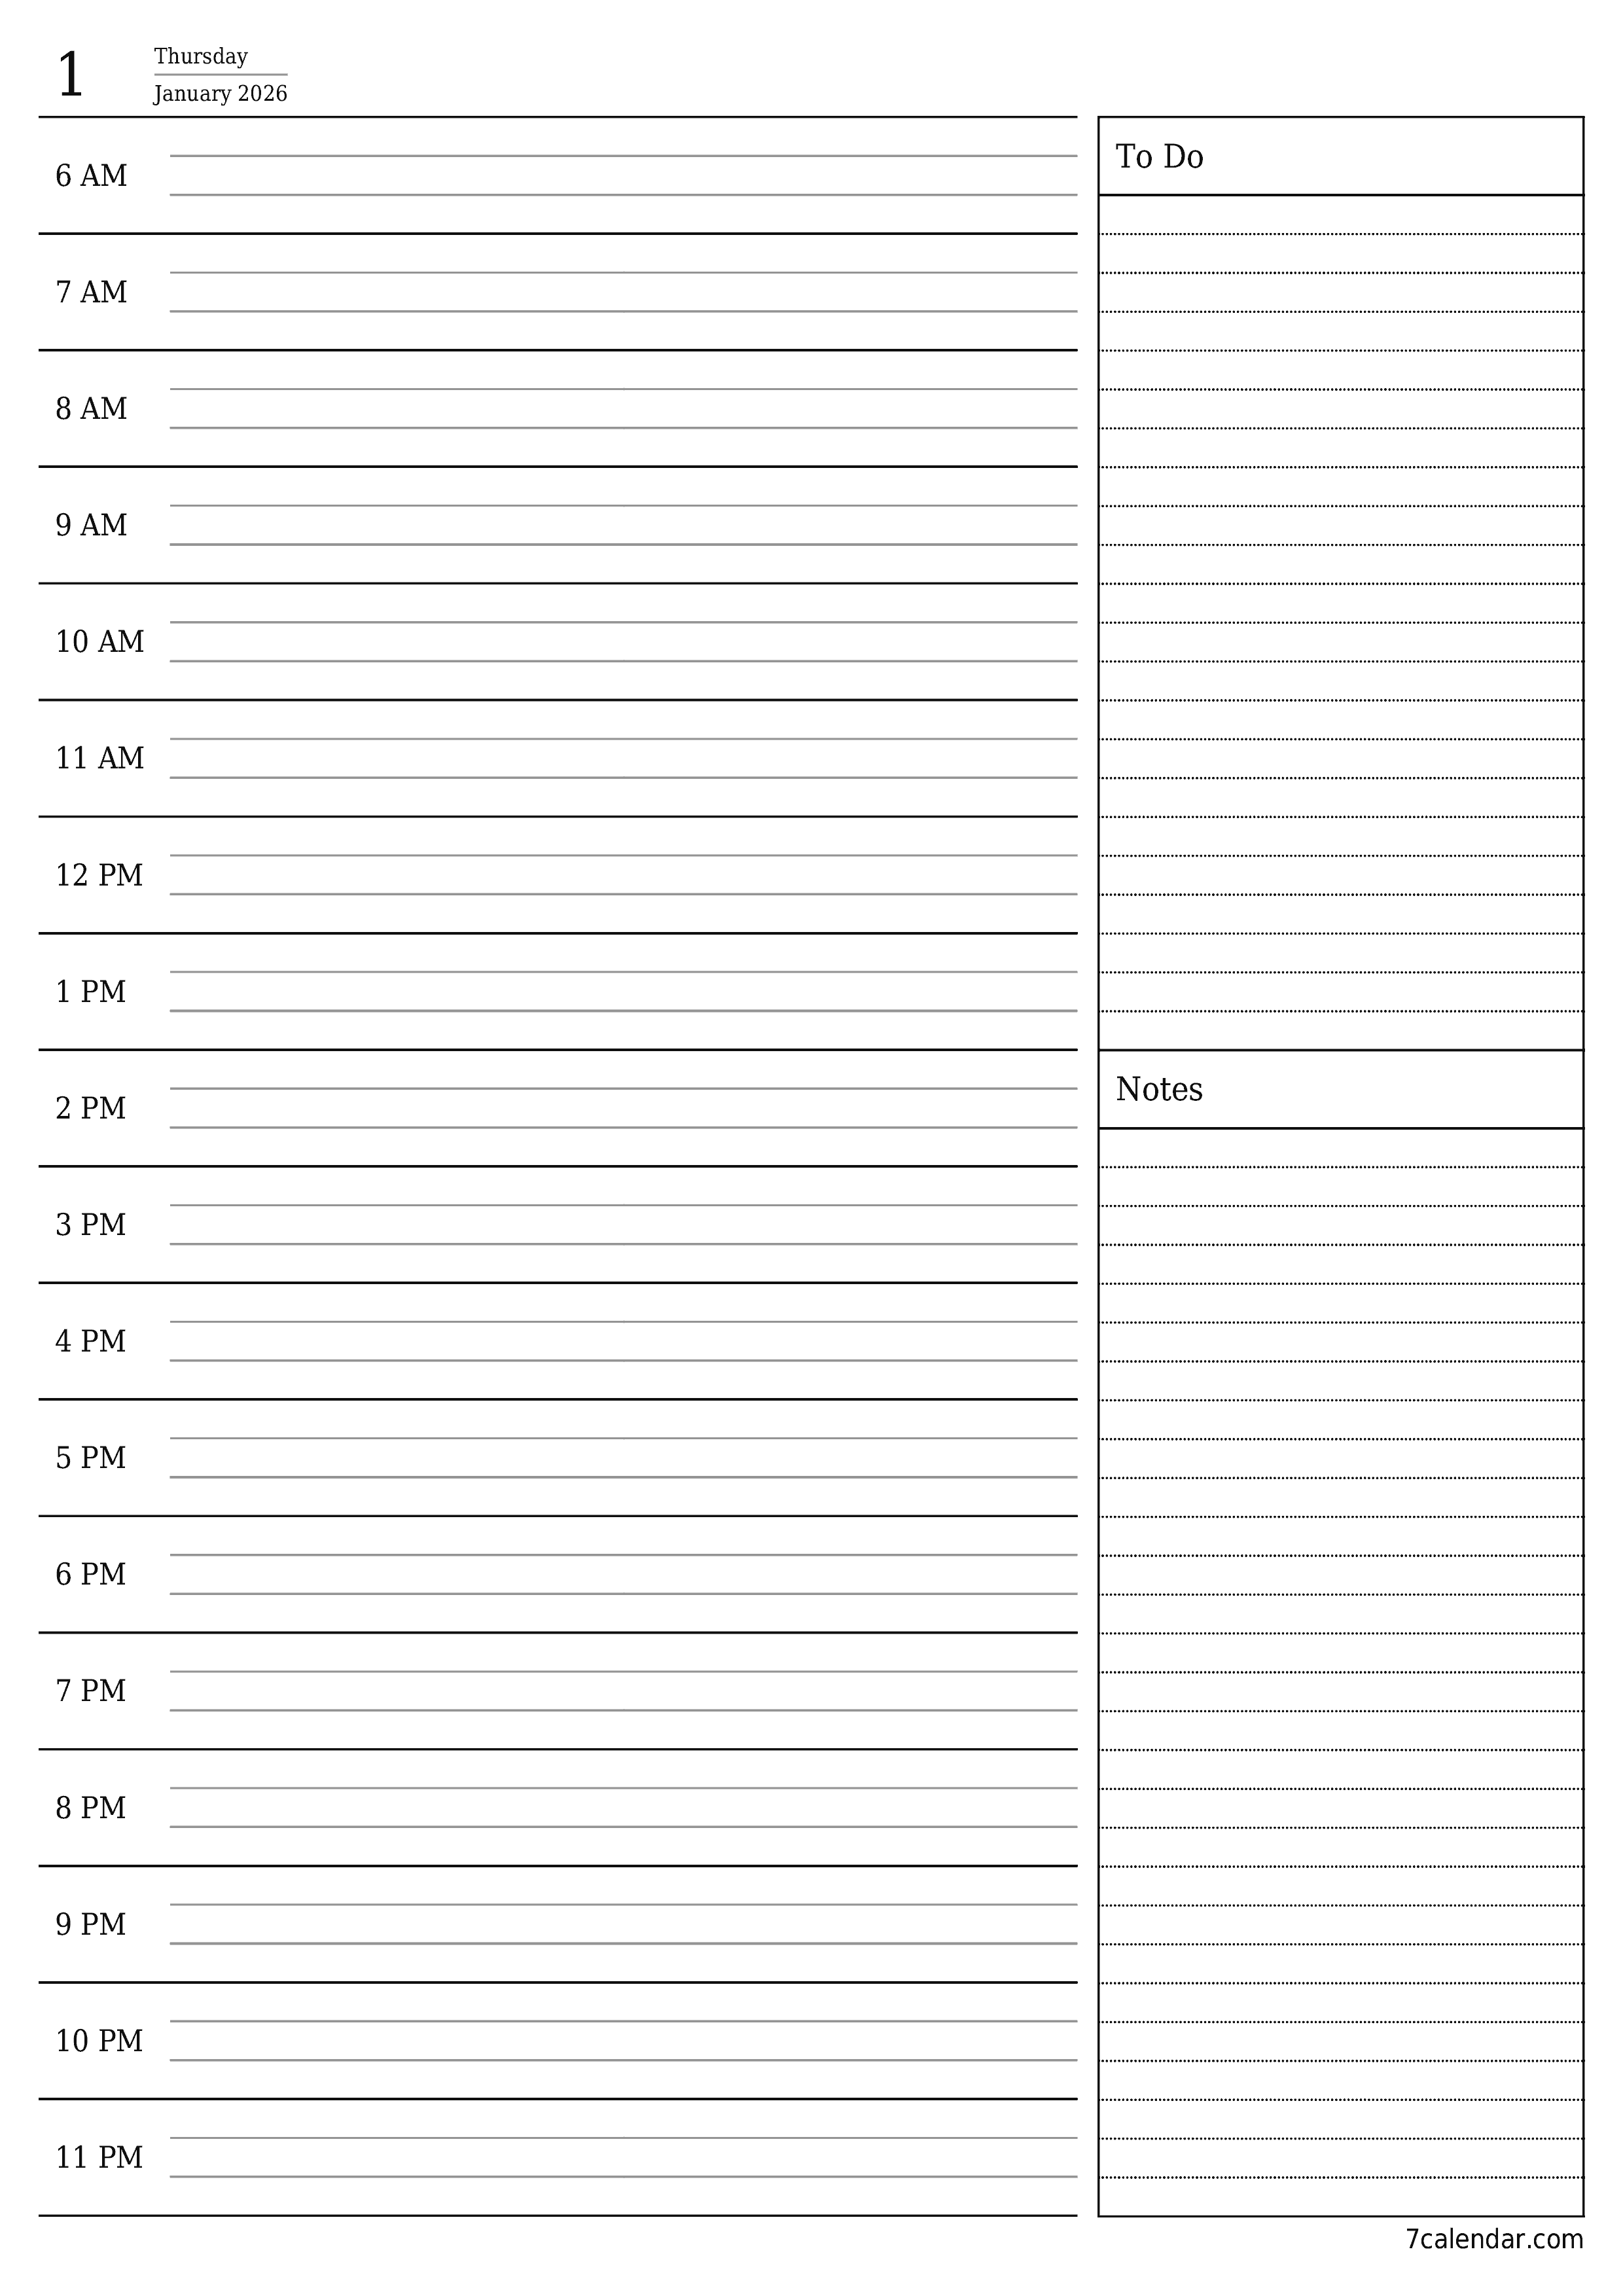 Blank daily printable calendar and planner for day January 2026 with notes, save and print to PDF PNG English